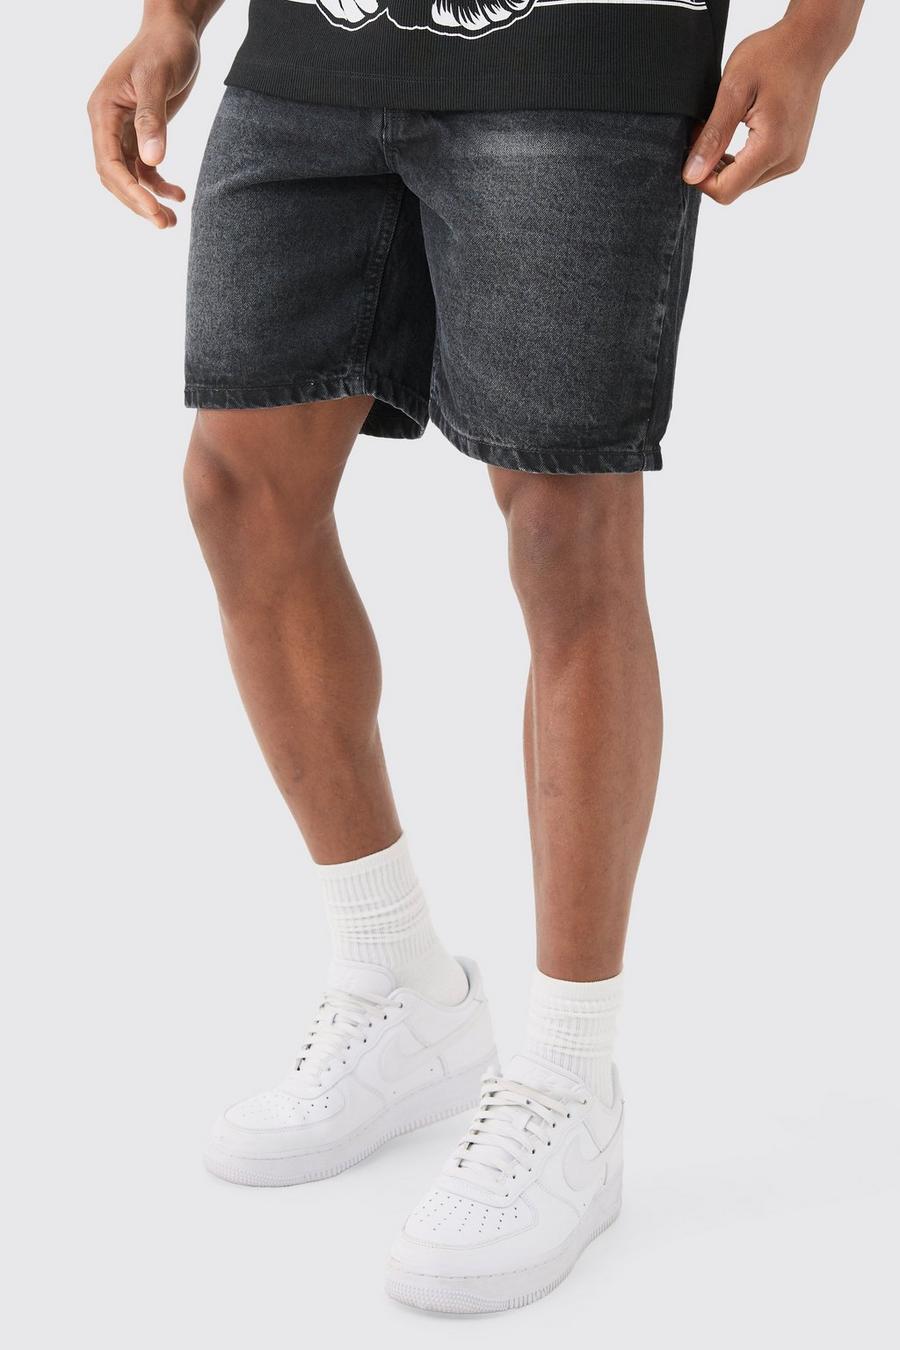 Slim-Fit Jeansshorts in Grau, Charcoal